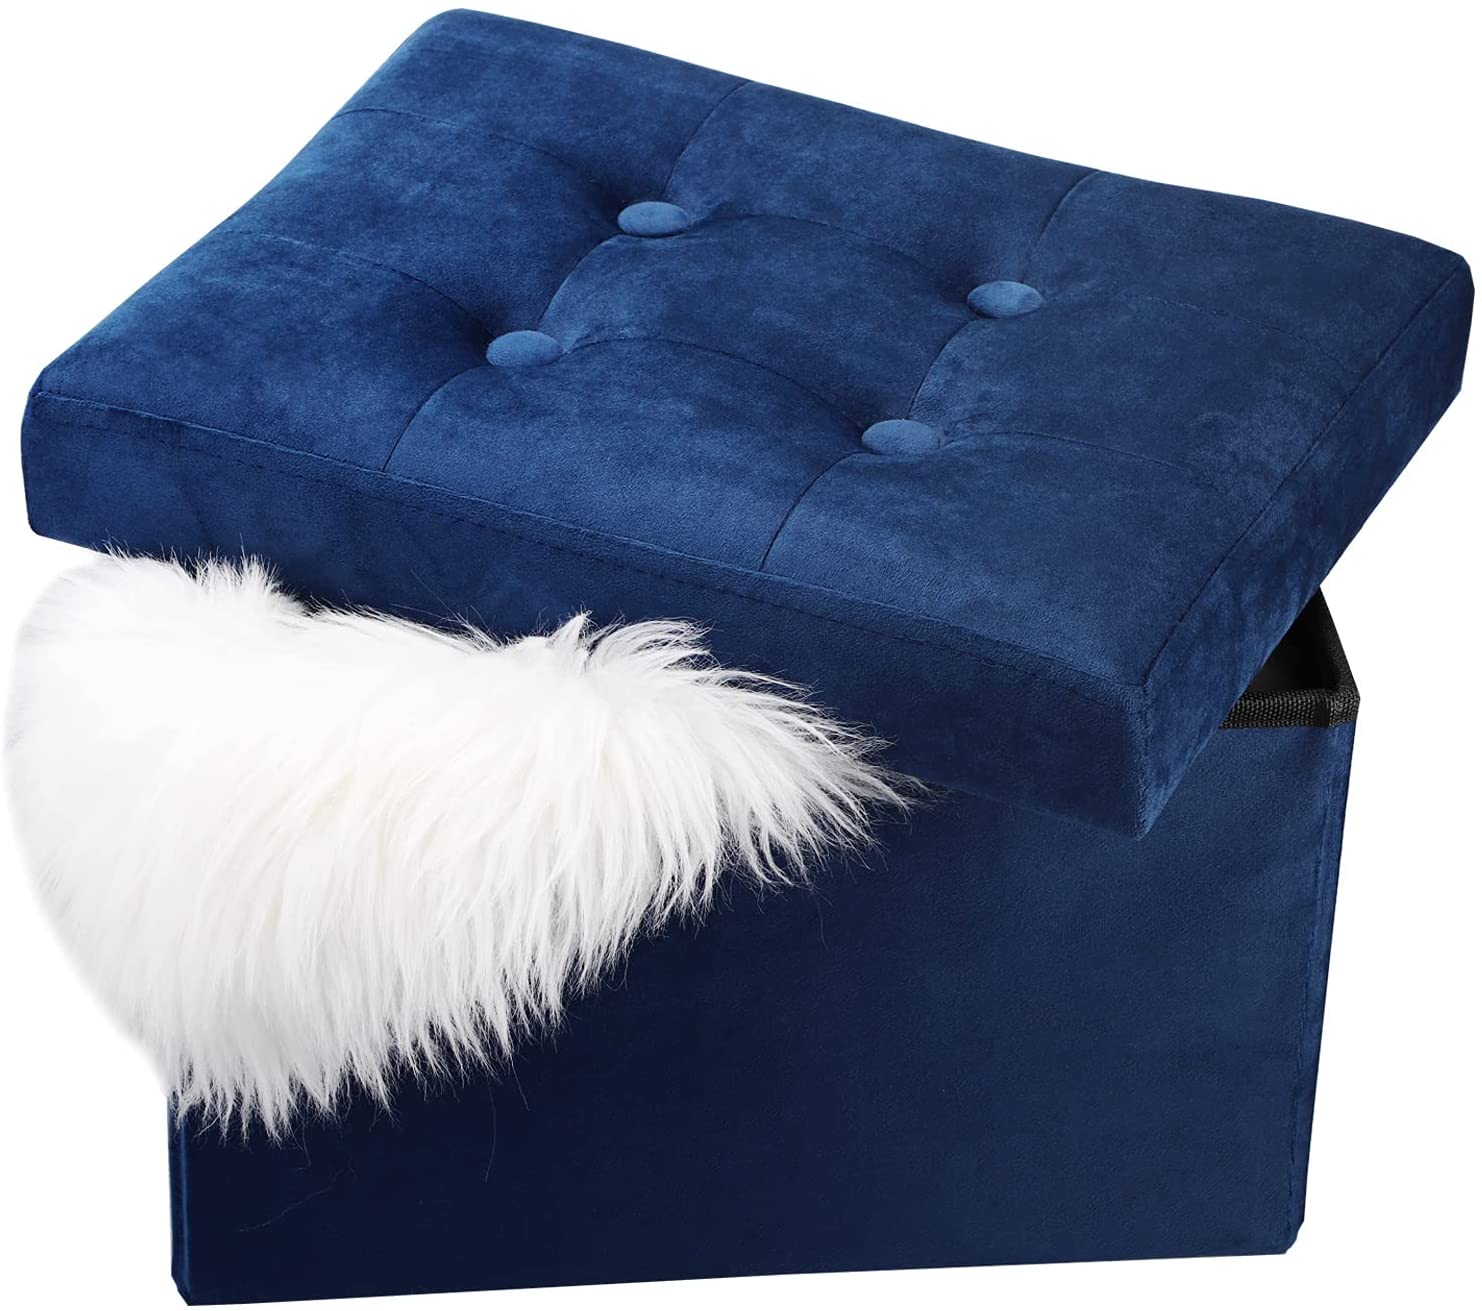 LINMAGCO 16 Small Velvet Ottoman with Storage